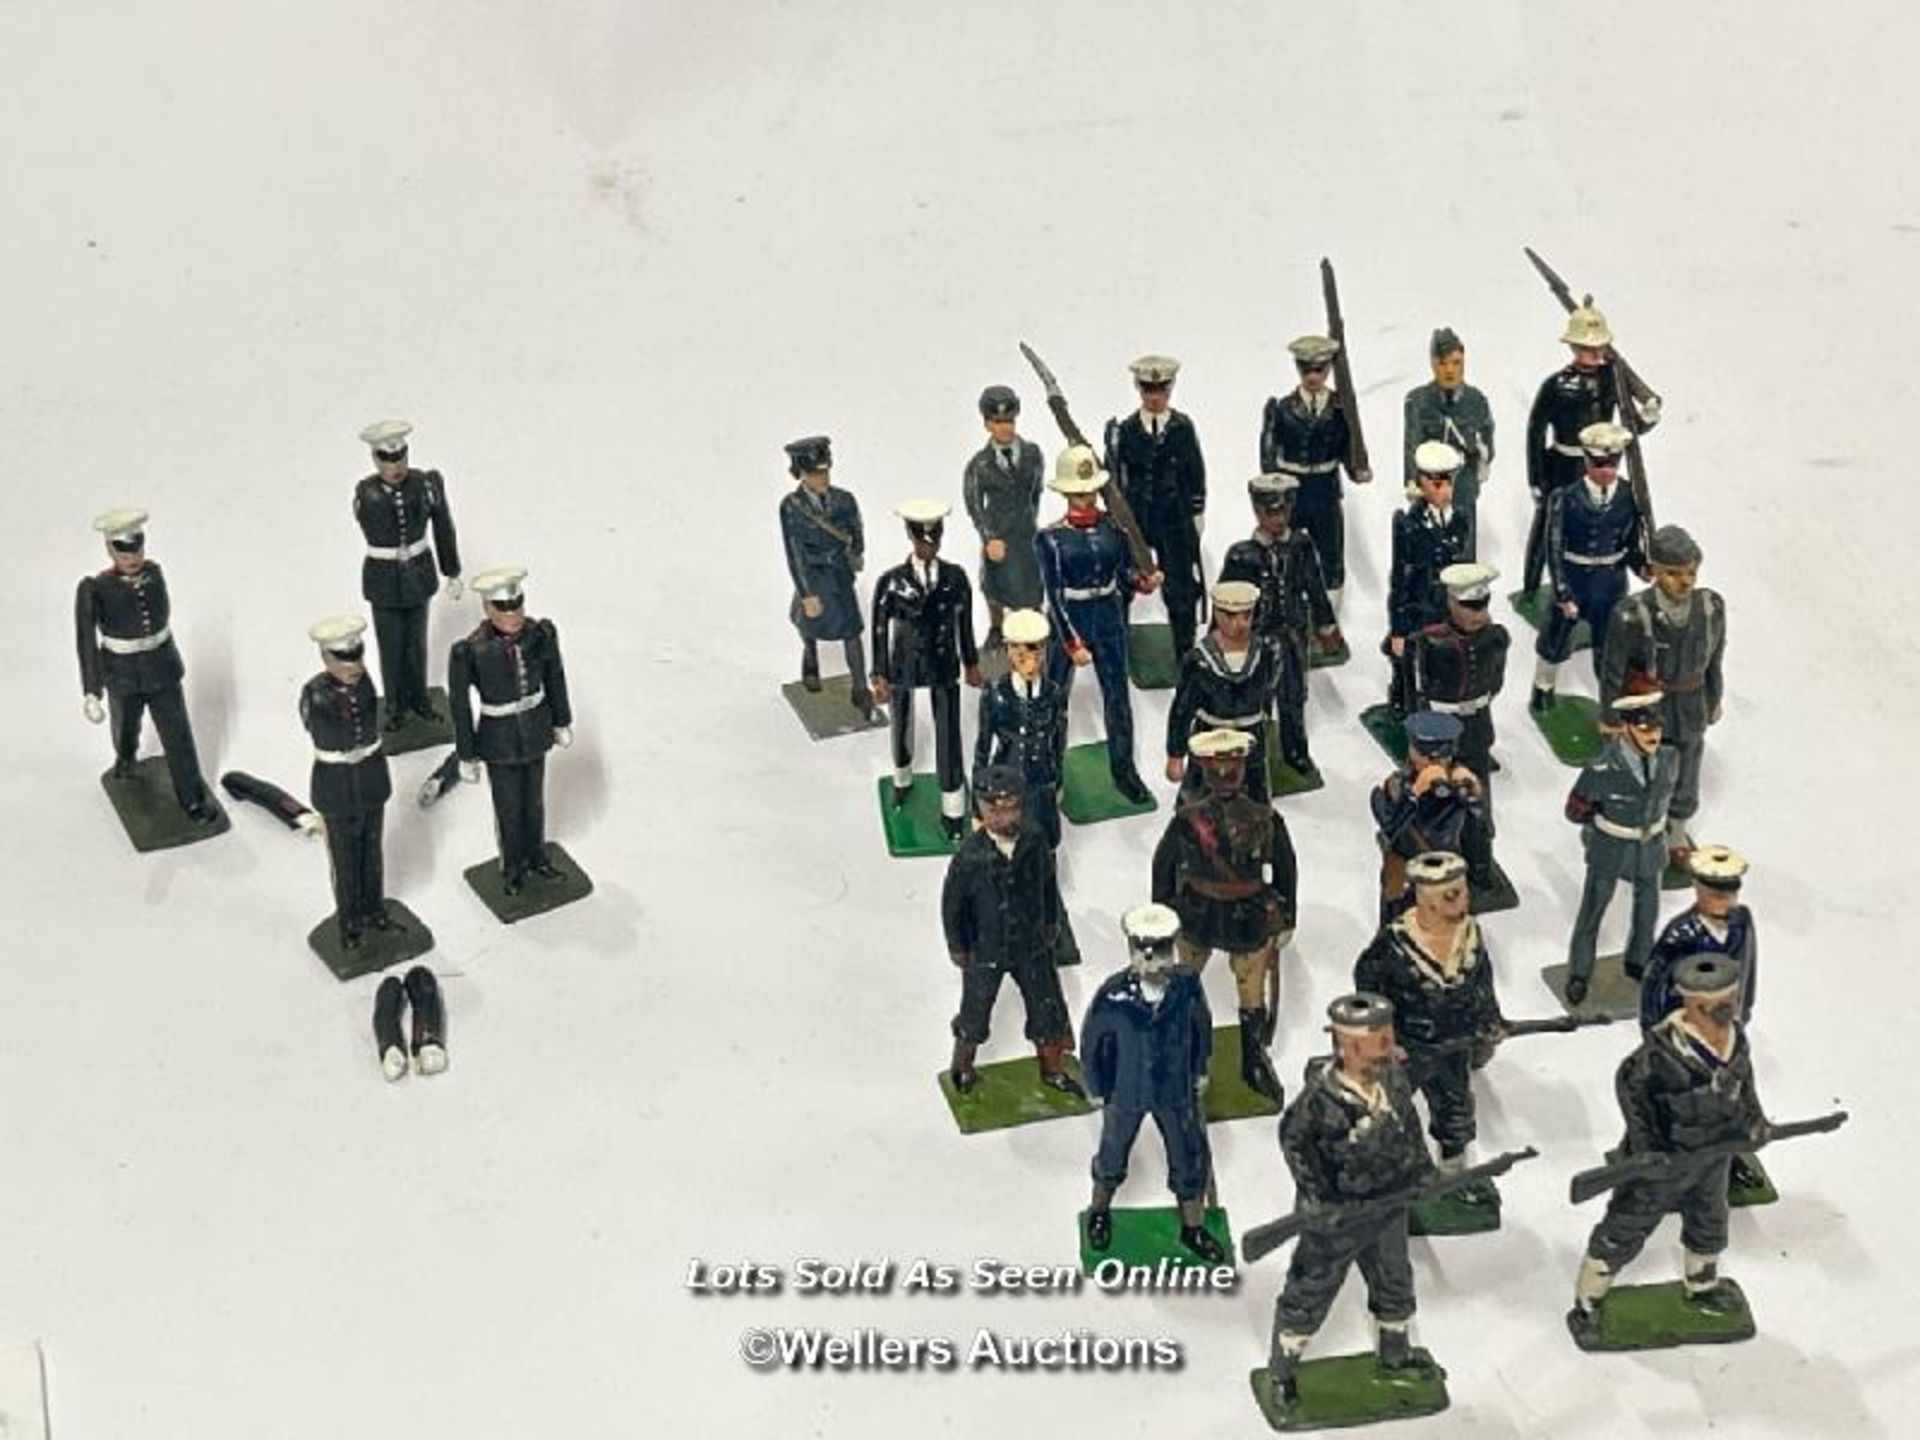 Twenty seven assorted hand painted military figures, some marked Britain's / AN5